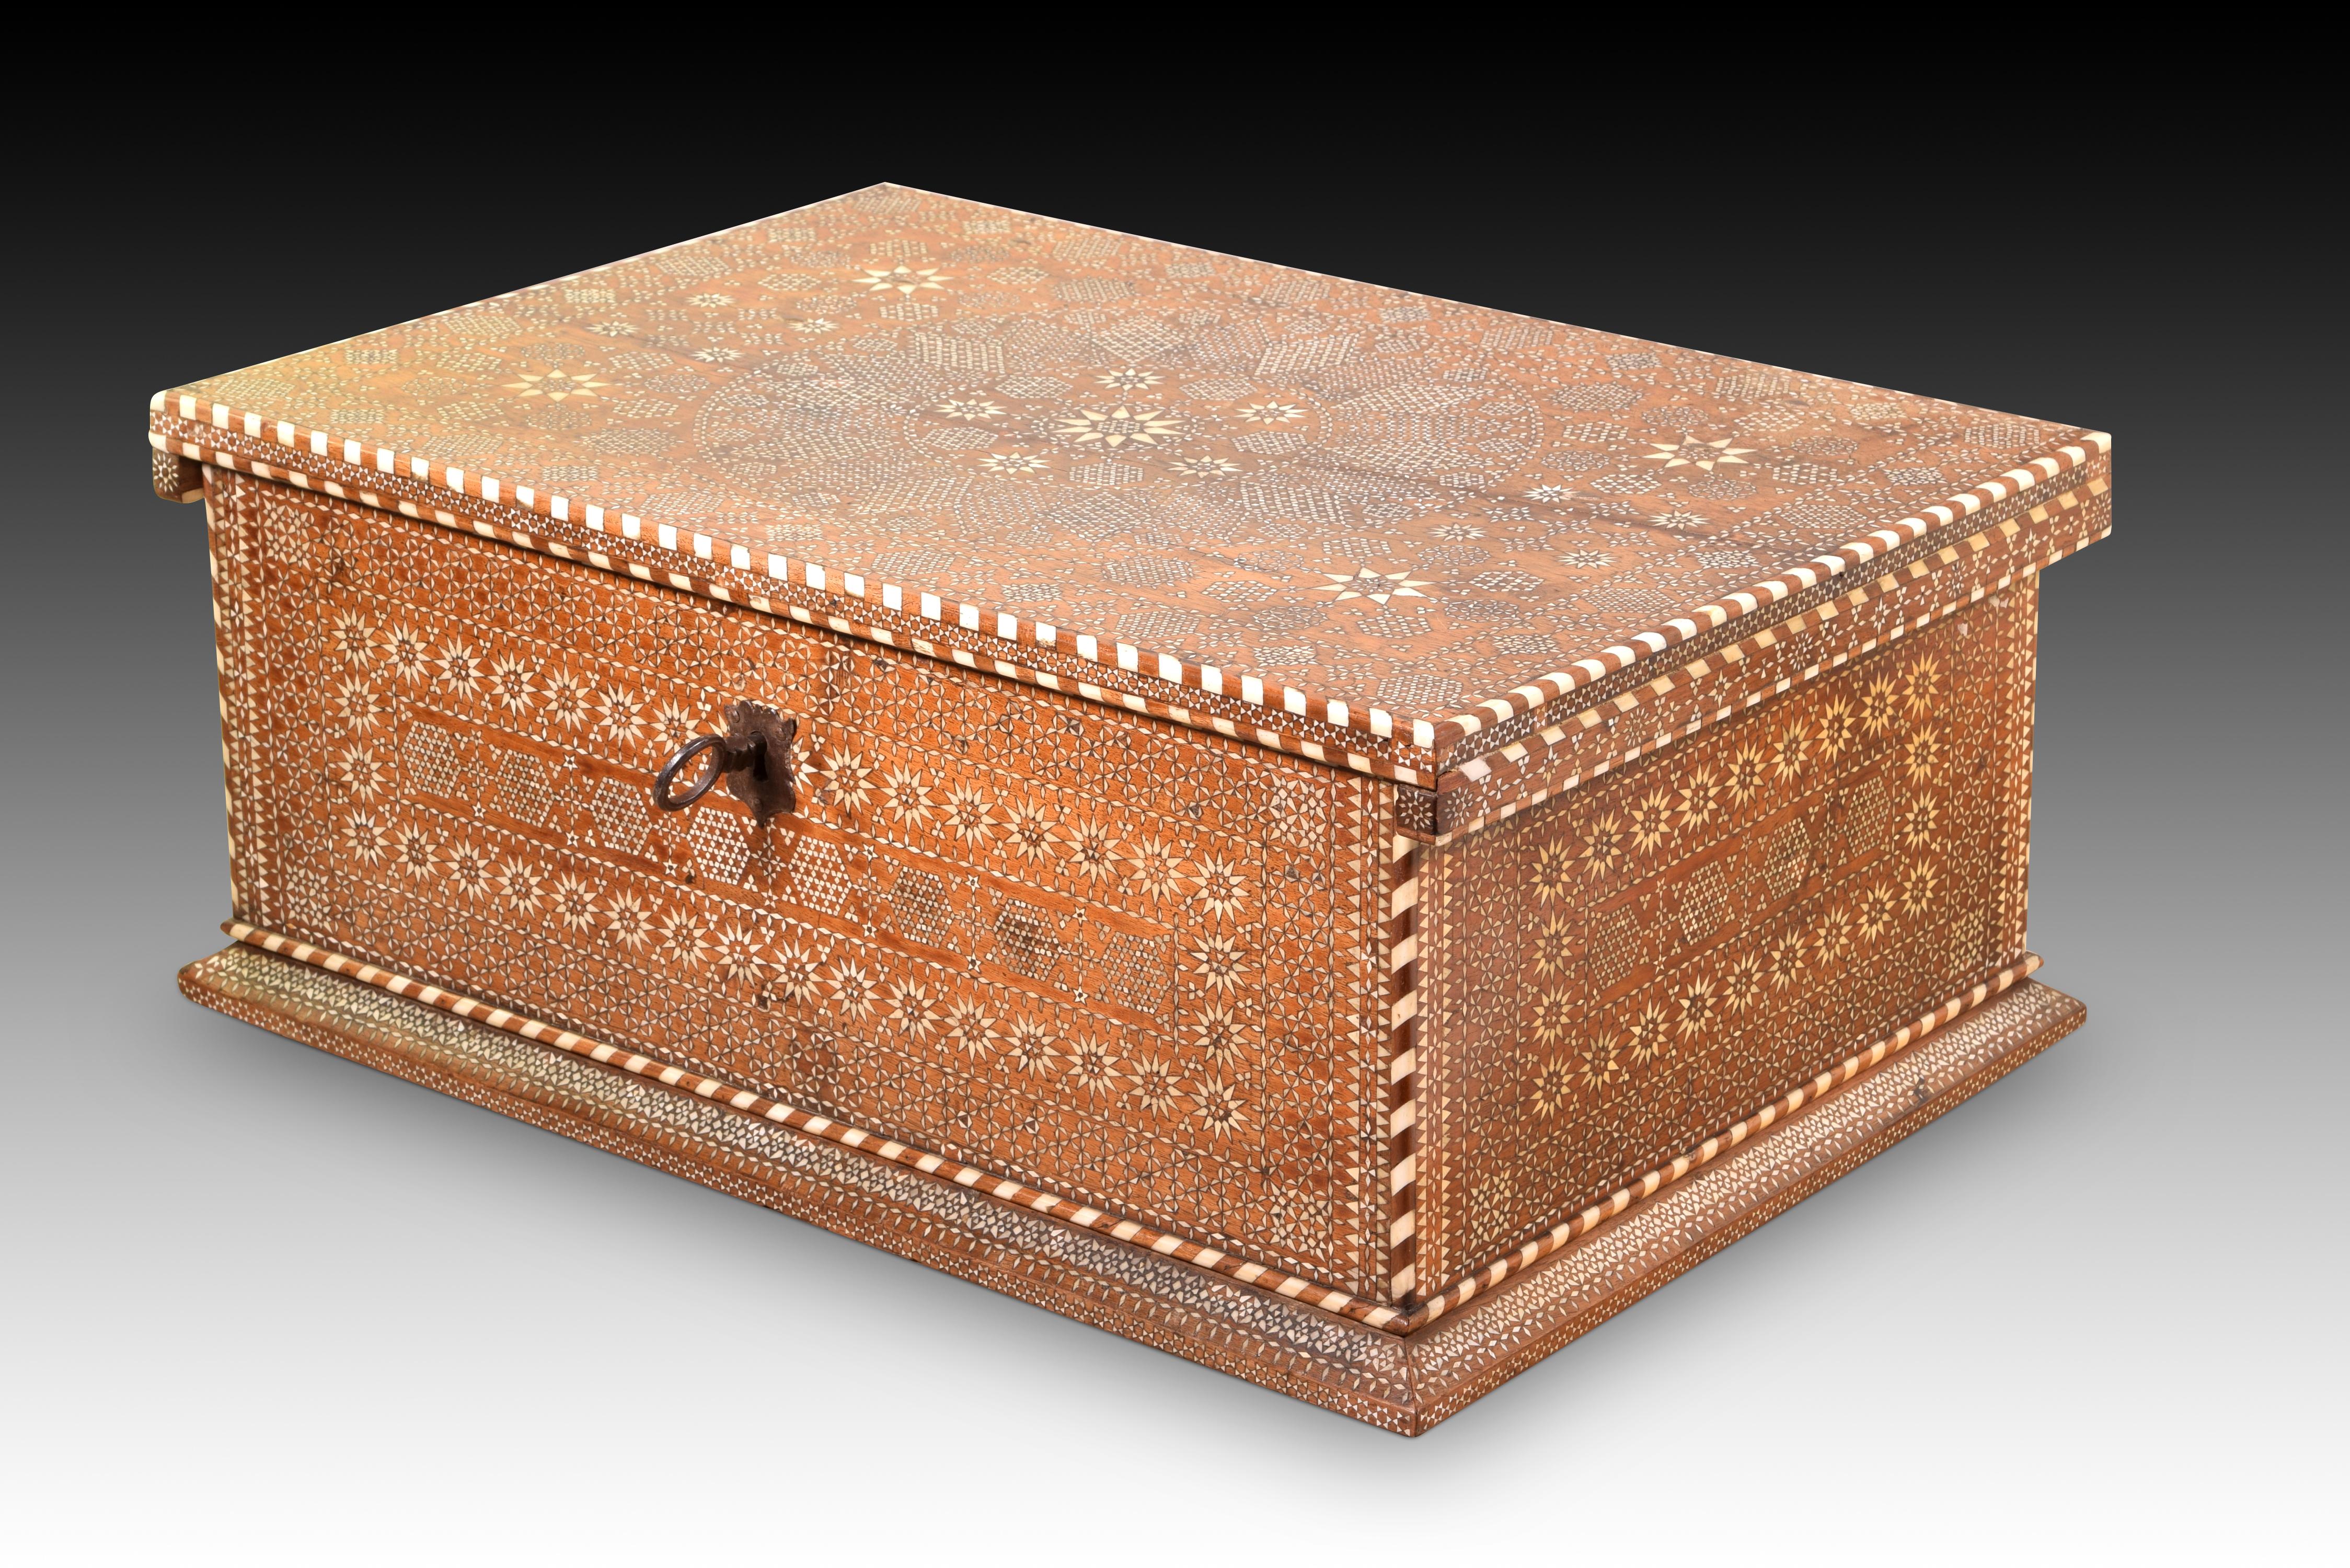 chest. Wood, bone inlay, iron. Spain, possibly Catalan or Aragonese school, 16th century (with later restorations). 
Rectangular casket with a flat lid that closes at the front by means of a key with a bolt with a decorated shield that is decorated